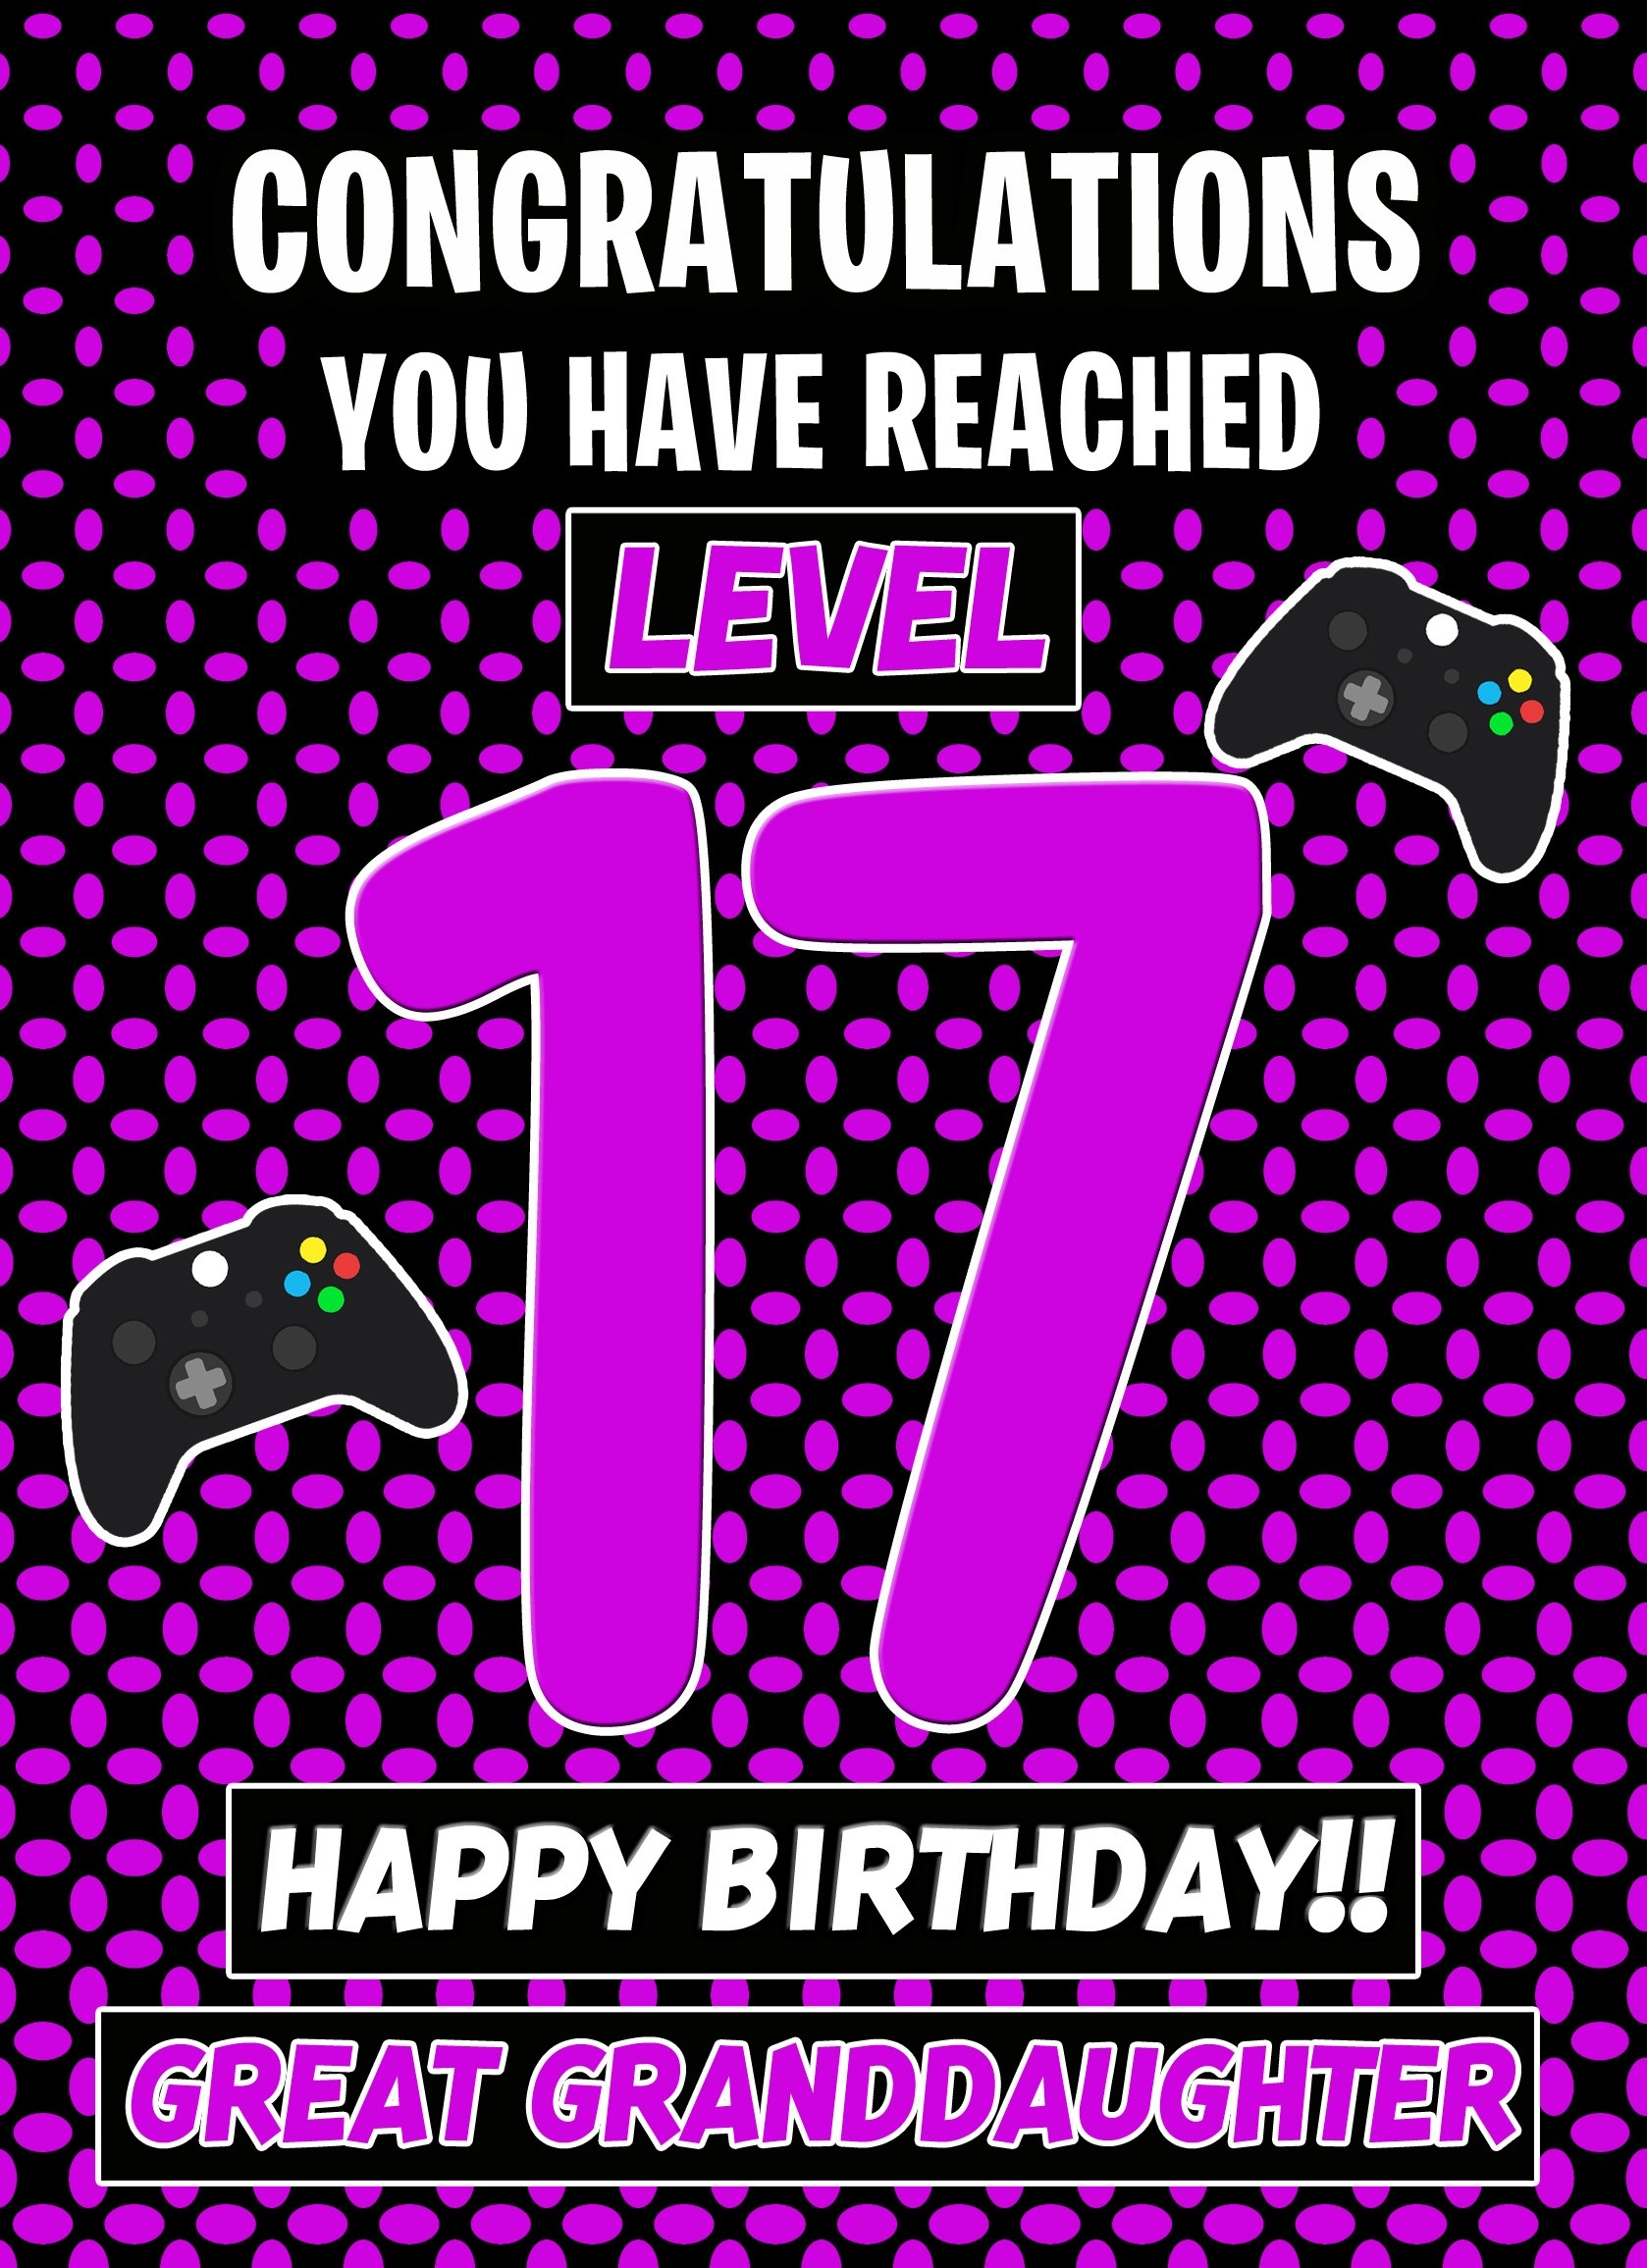 Great Granddaughter 17th Birthday Card (Level Up Gamer)